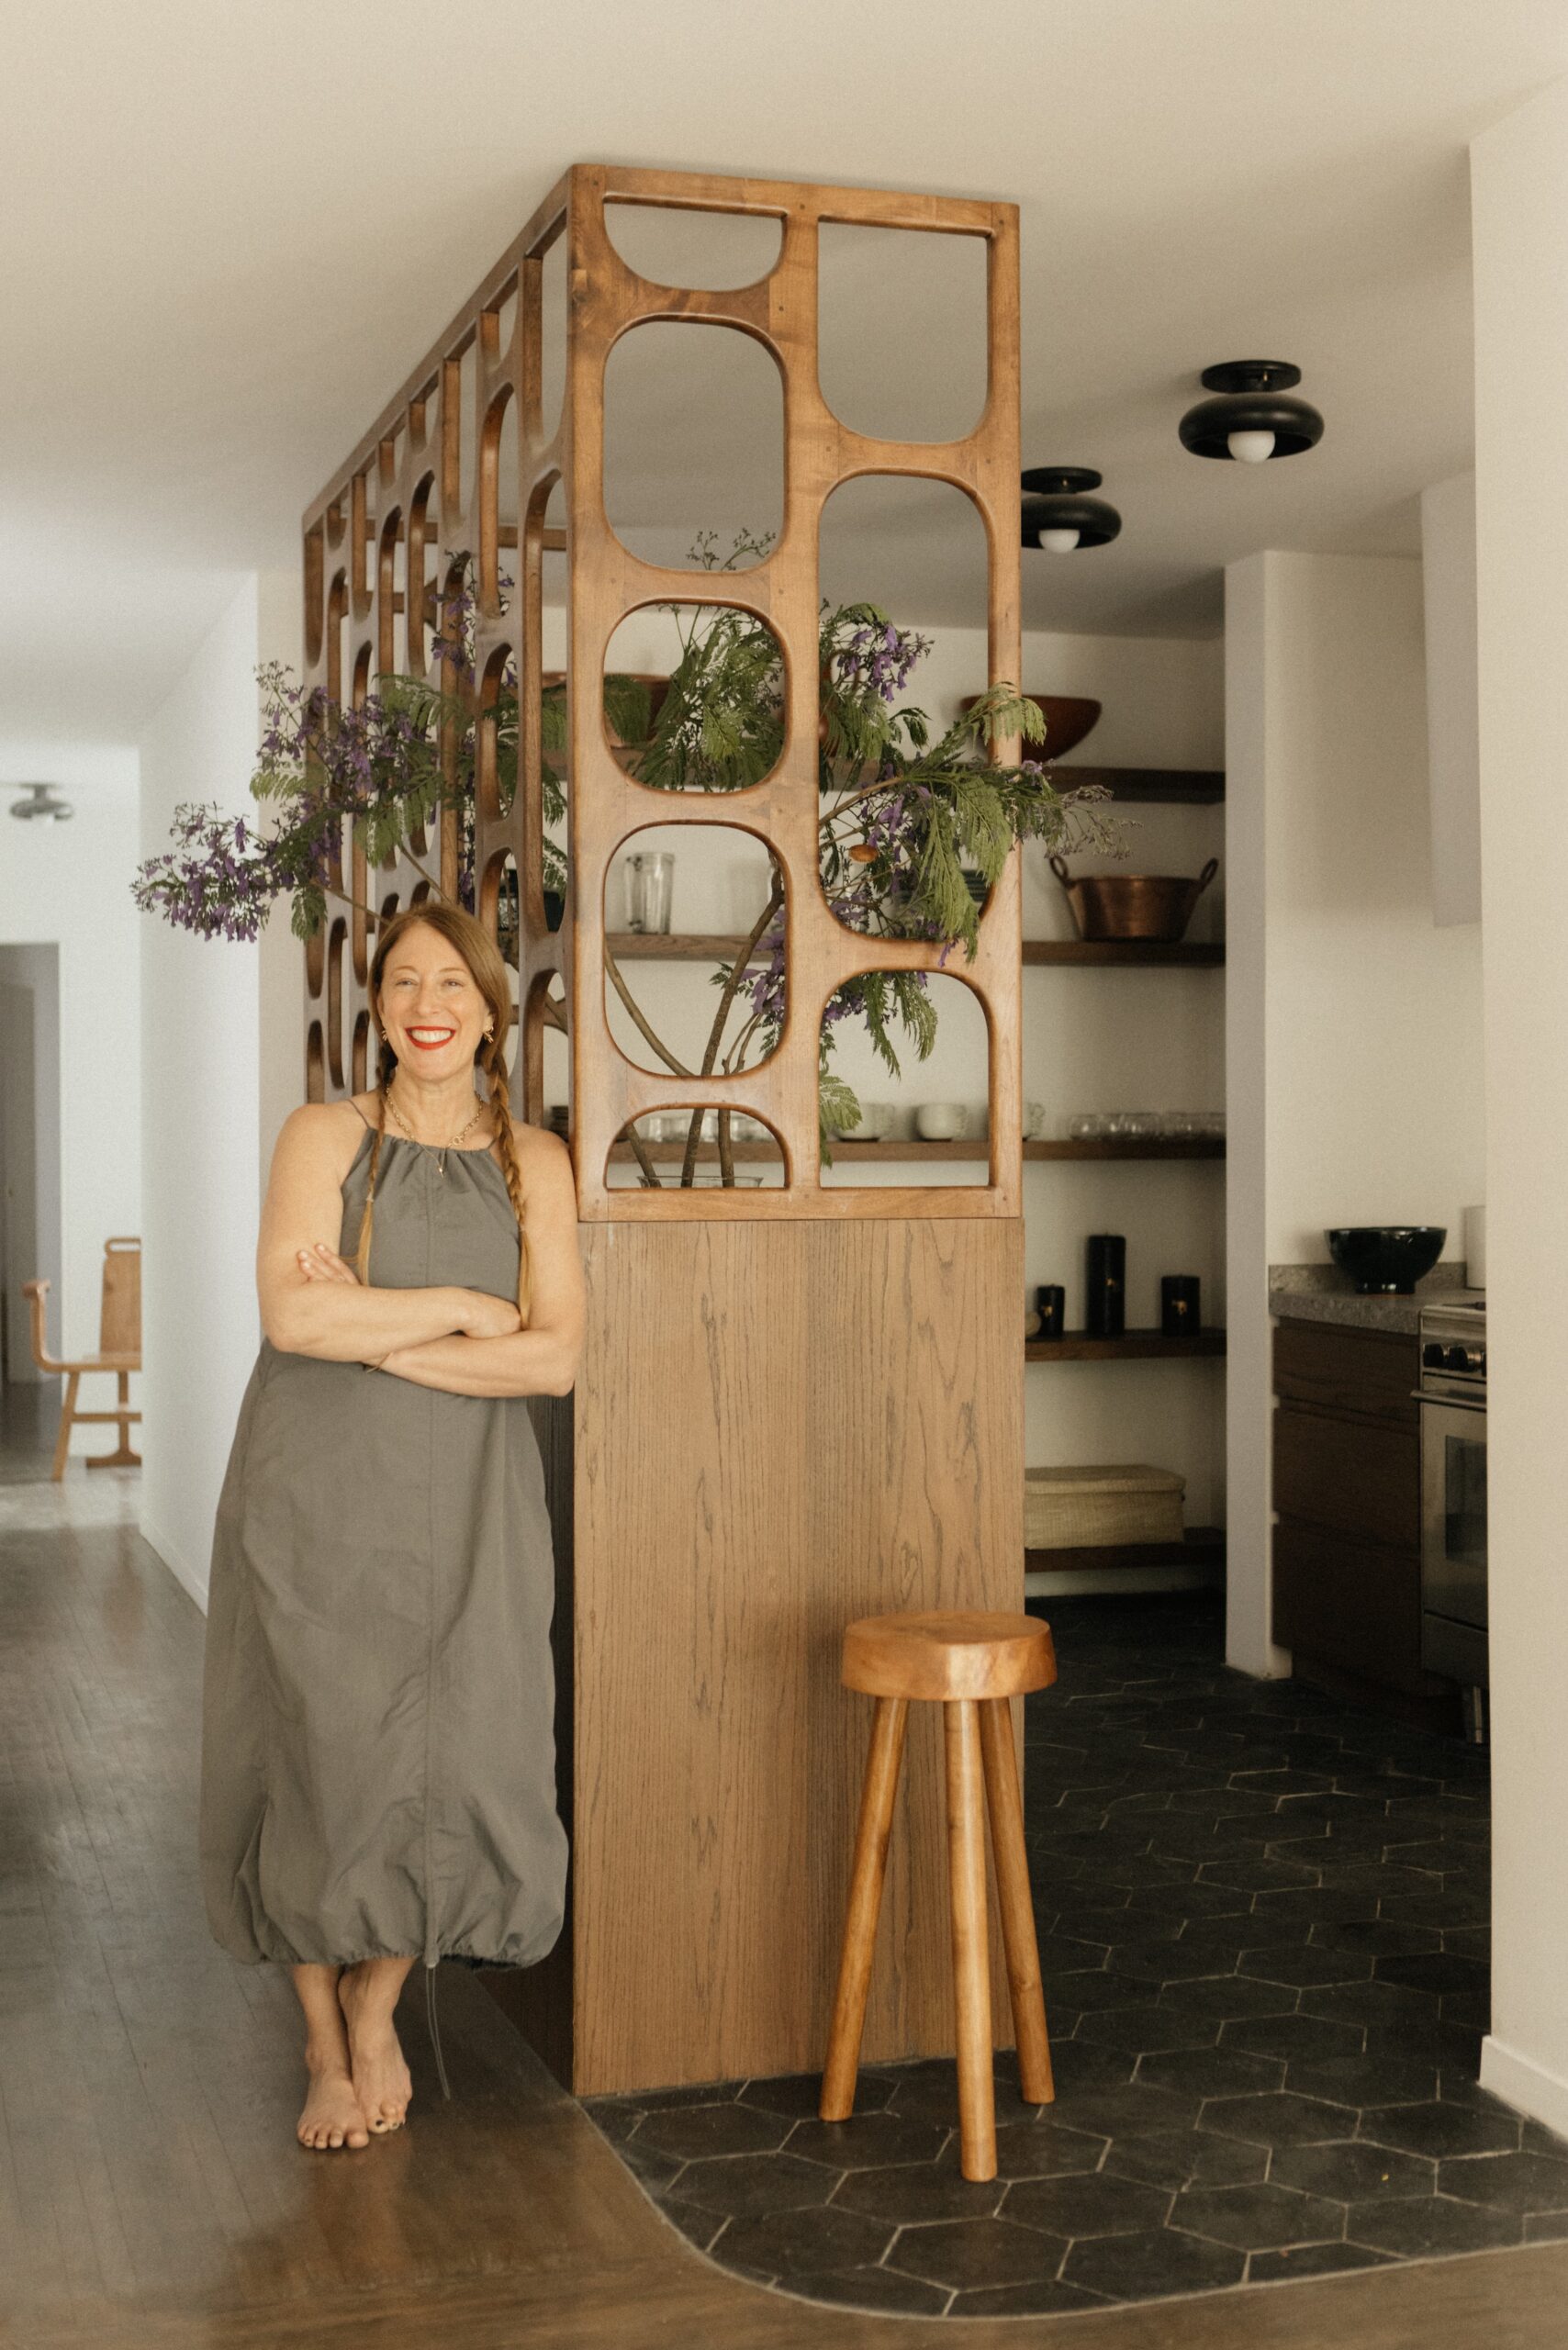 kitchen of the week: a creative couple